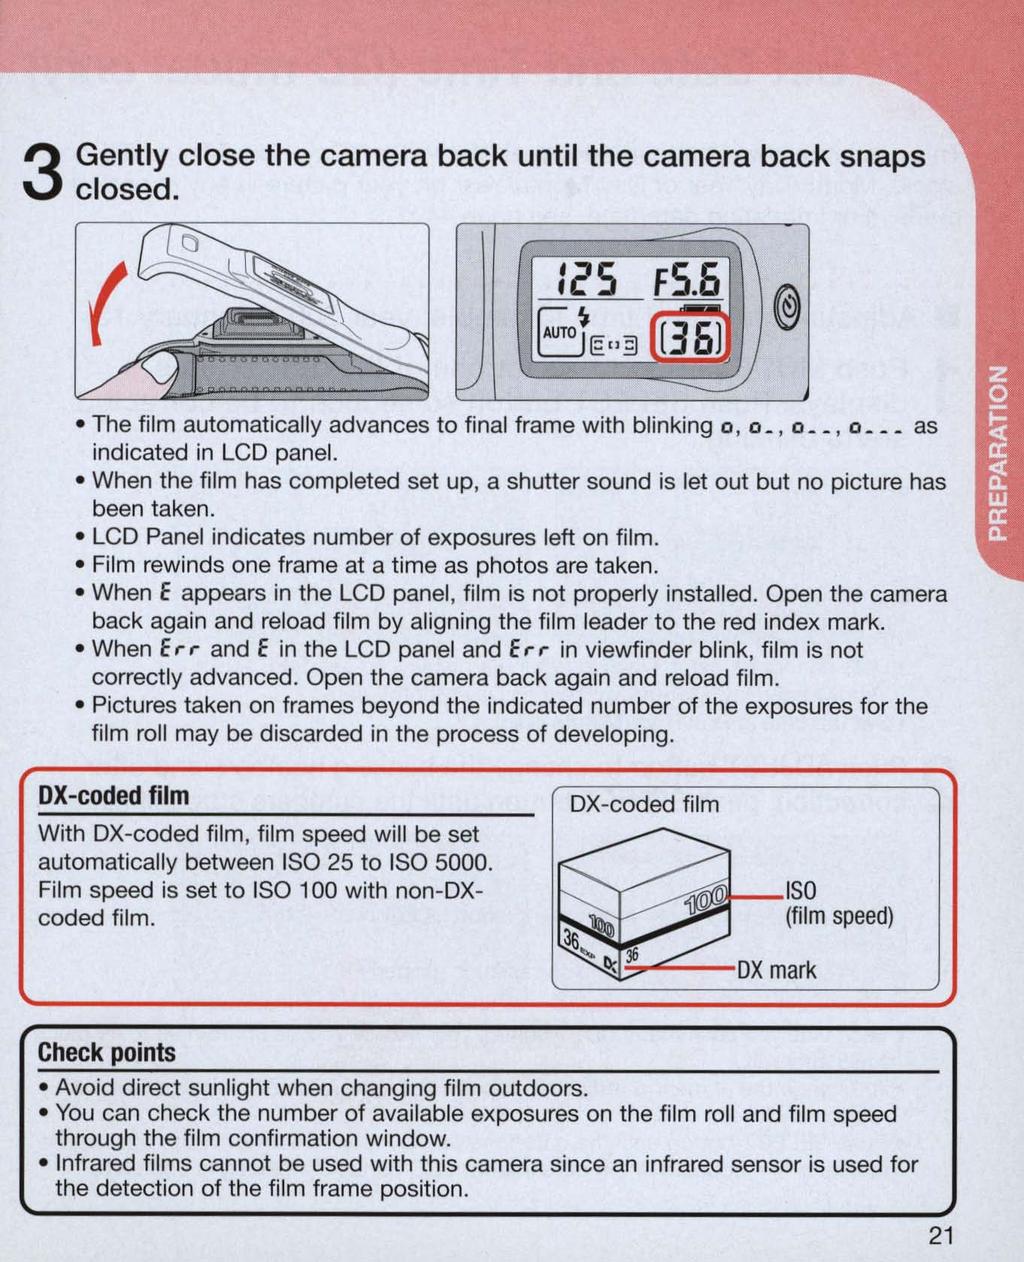 Gently close the camera back until the camera back snaps 3 closed. -~ :(,5 F5.6 @ BE u3[m J 2) The film automatically advances to final frame with blinking 0, 0 _, 0, 0 as indicated in LCD panel.